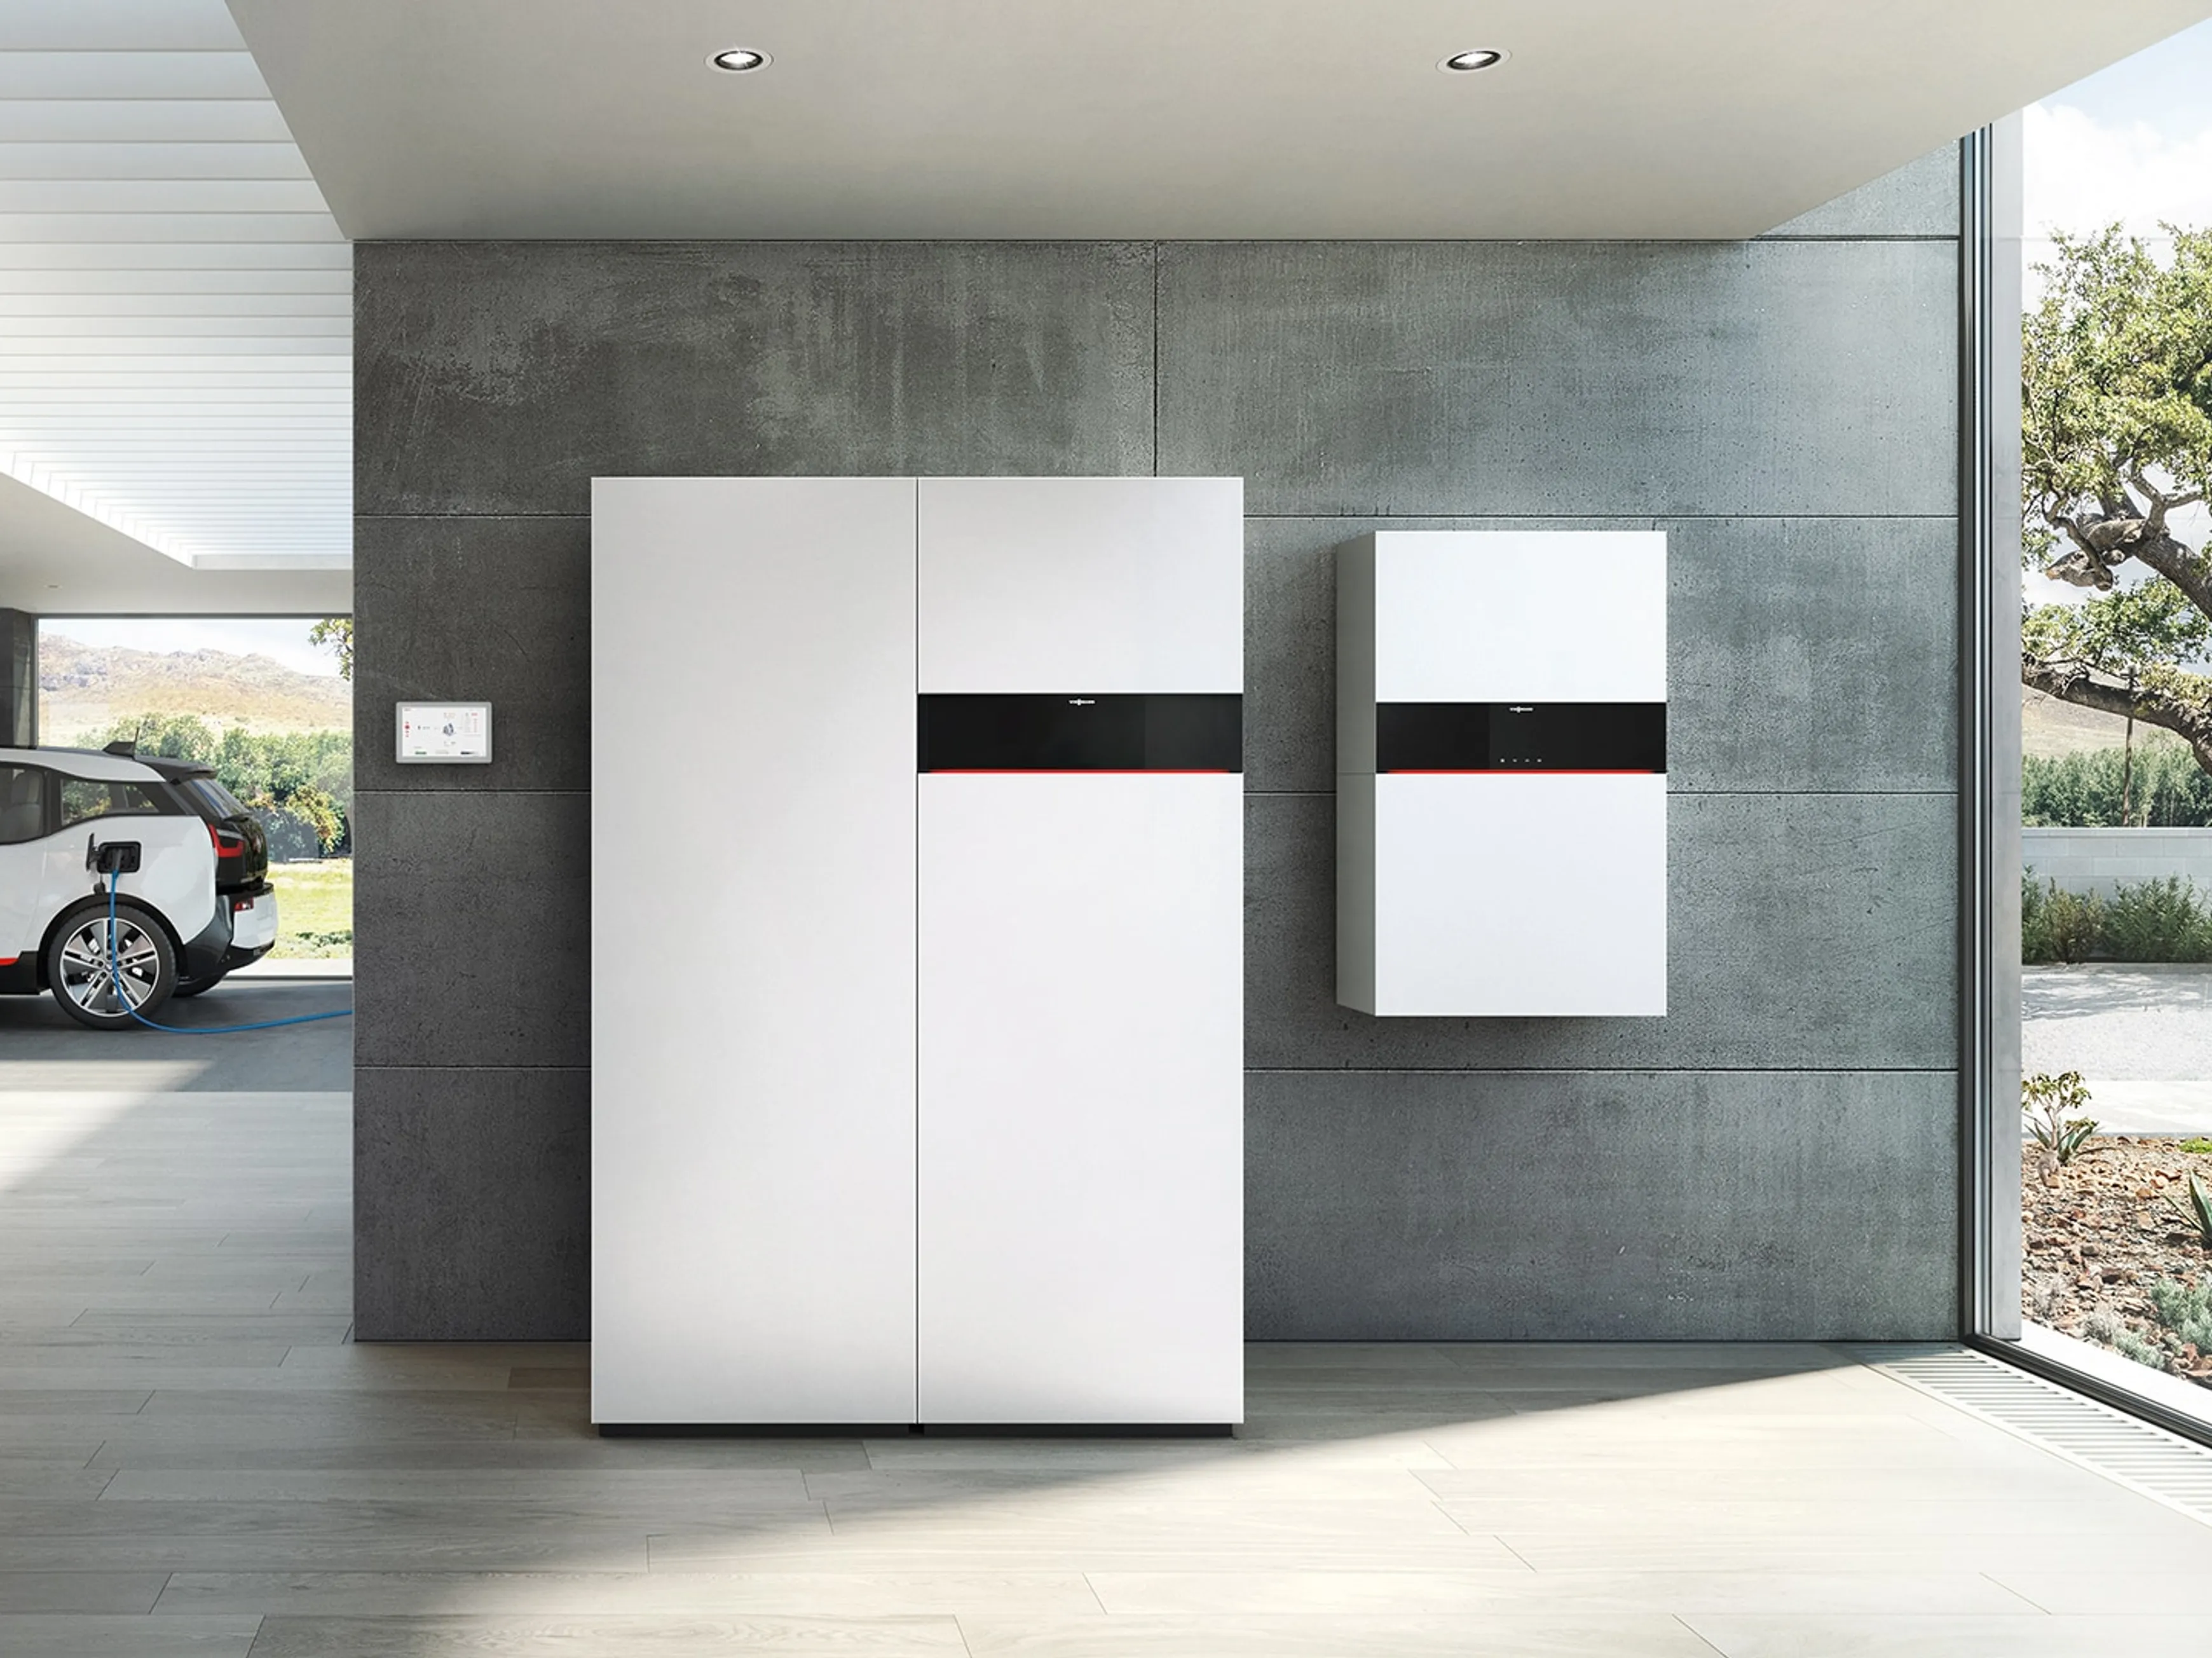 Viessmann Vitodens standing in a concrete garage with an EV in the background